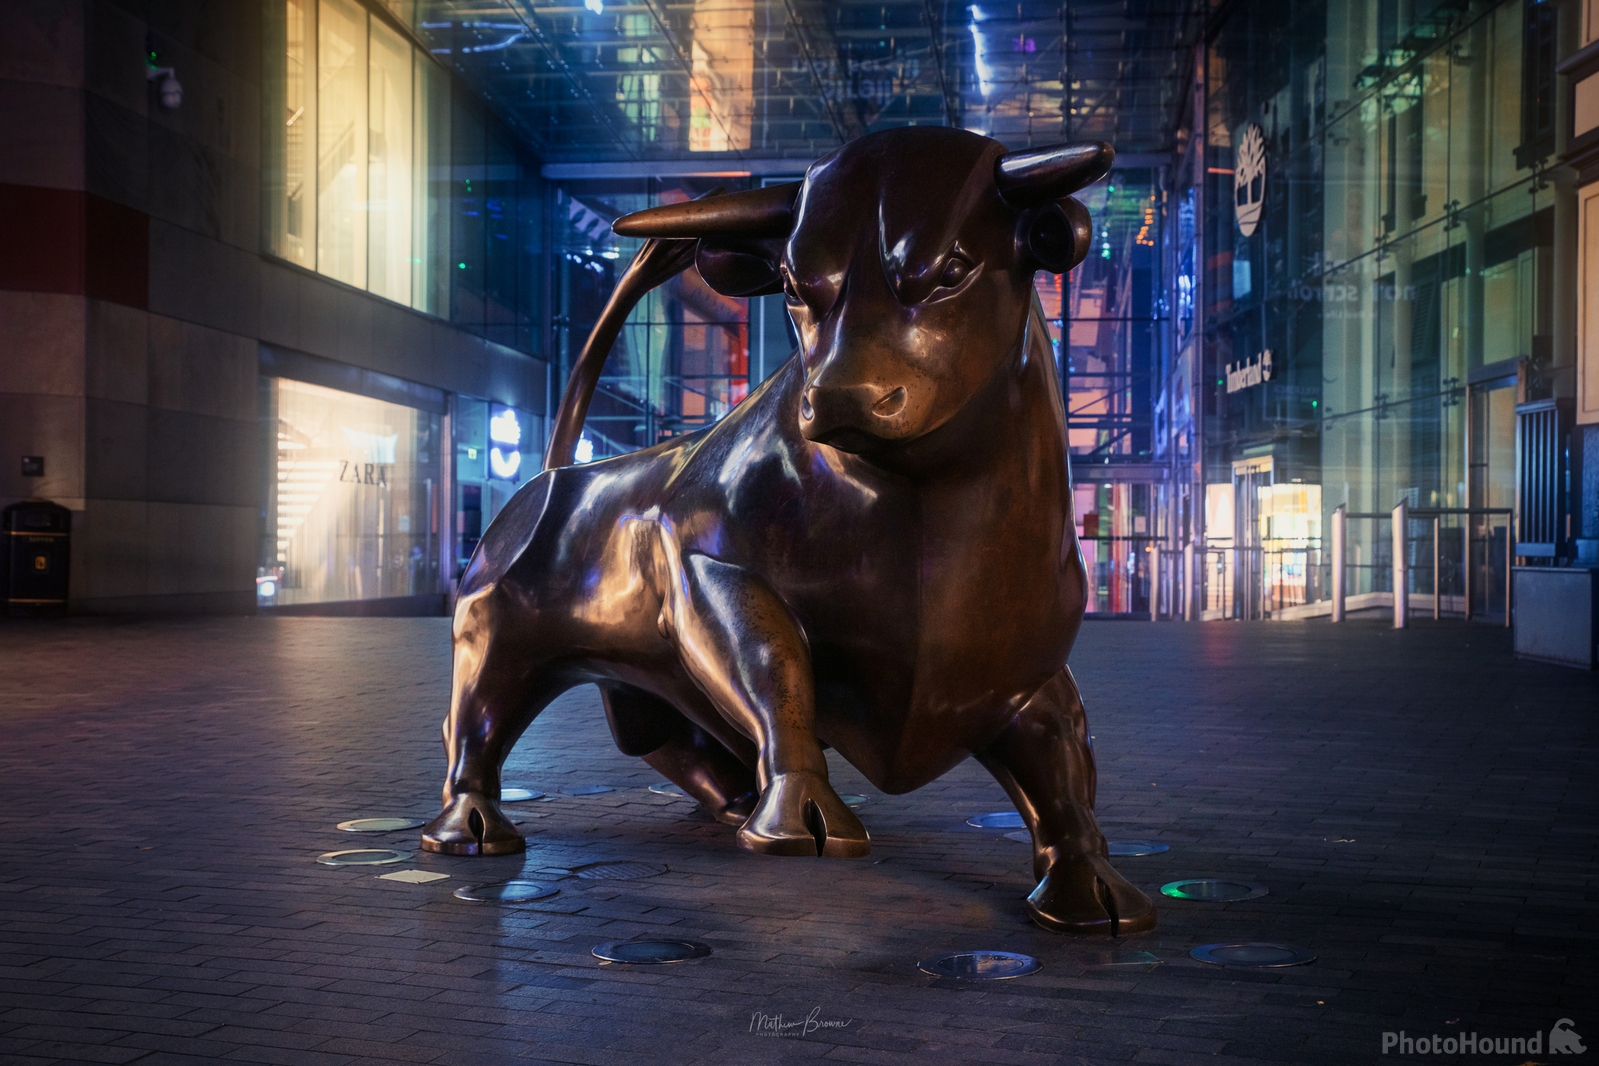 Image of The Guardian of the Bullring by Mathew Browne